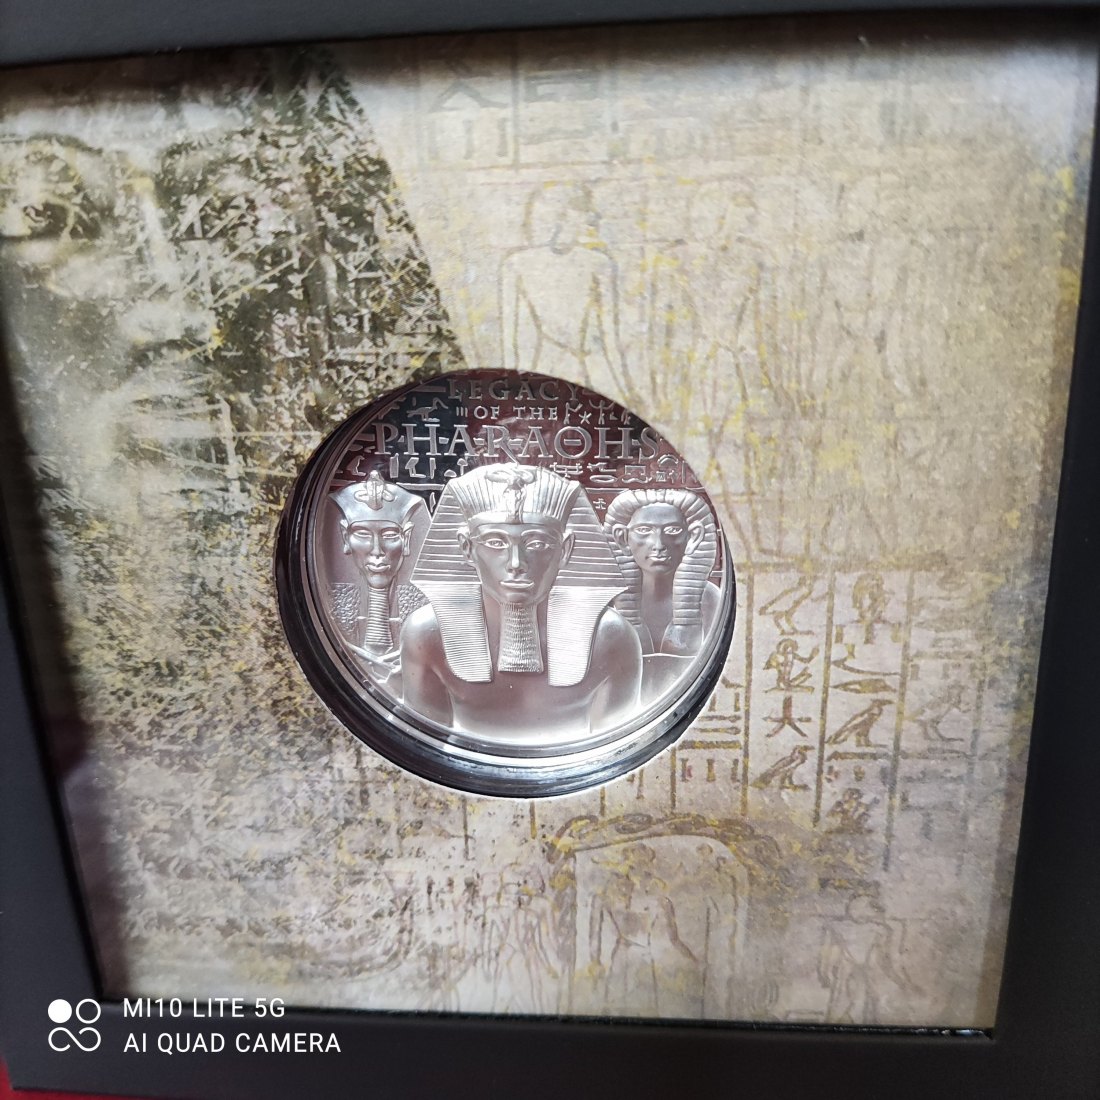  Cook Islands Inseln 1 Oz Silber proof pp 5 $ 2022 Legacy of the Pharaohs Ultra High Relief Prägung   